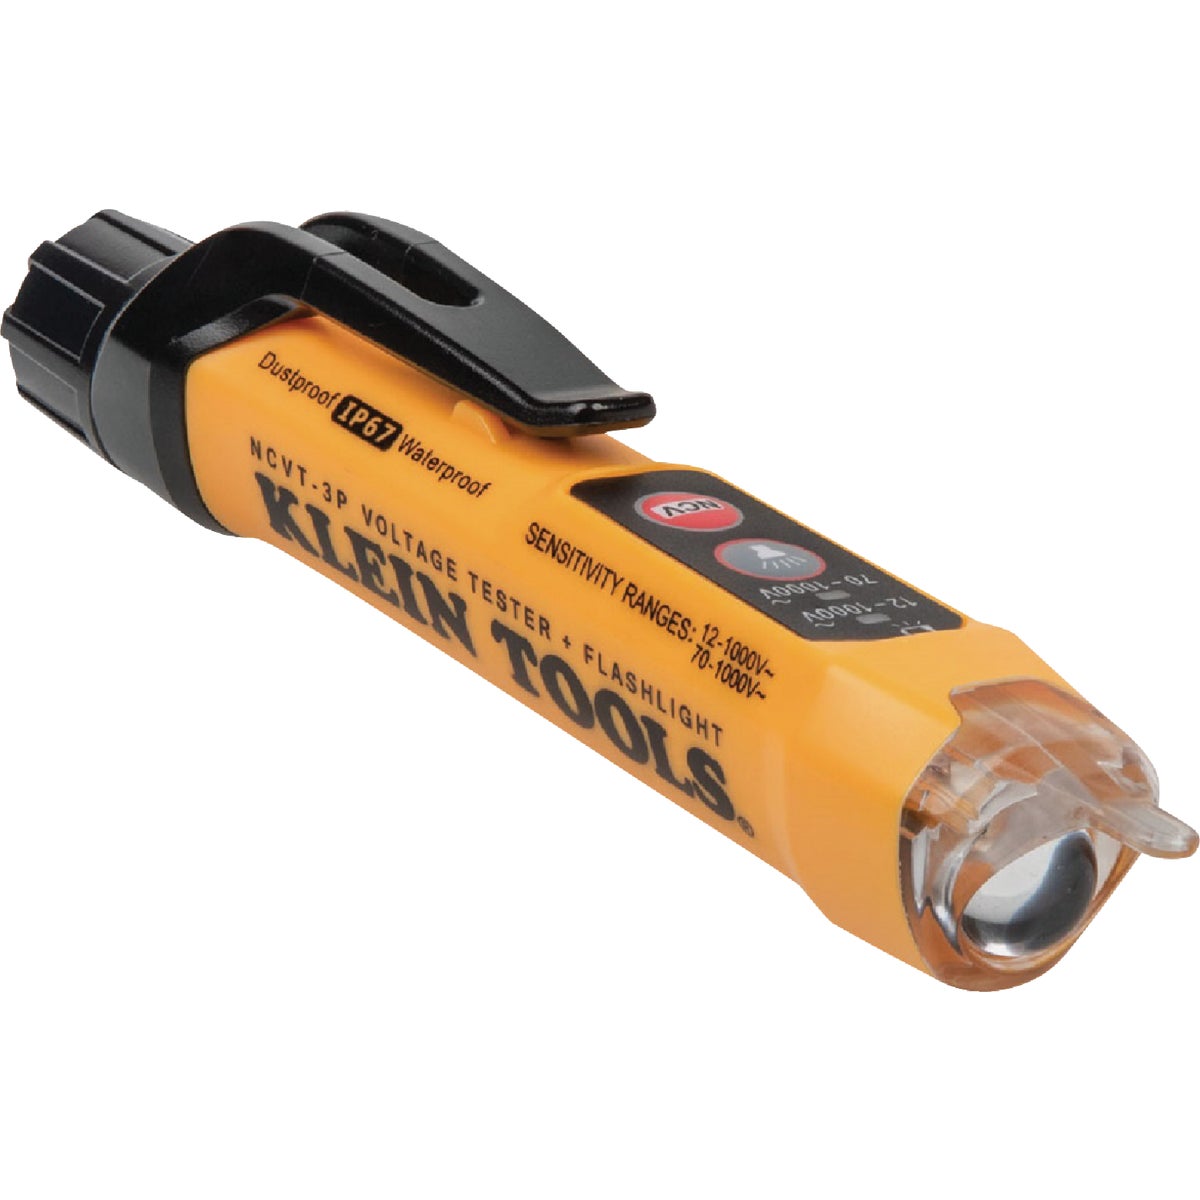 Item 500012, Dual range non-contact voltage tester with an integrated flashlight that 